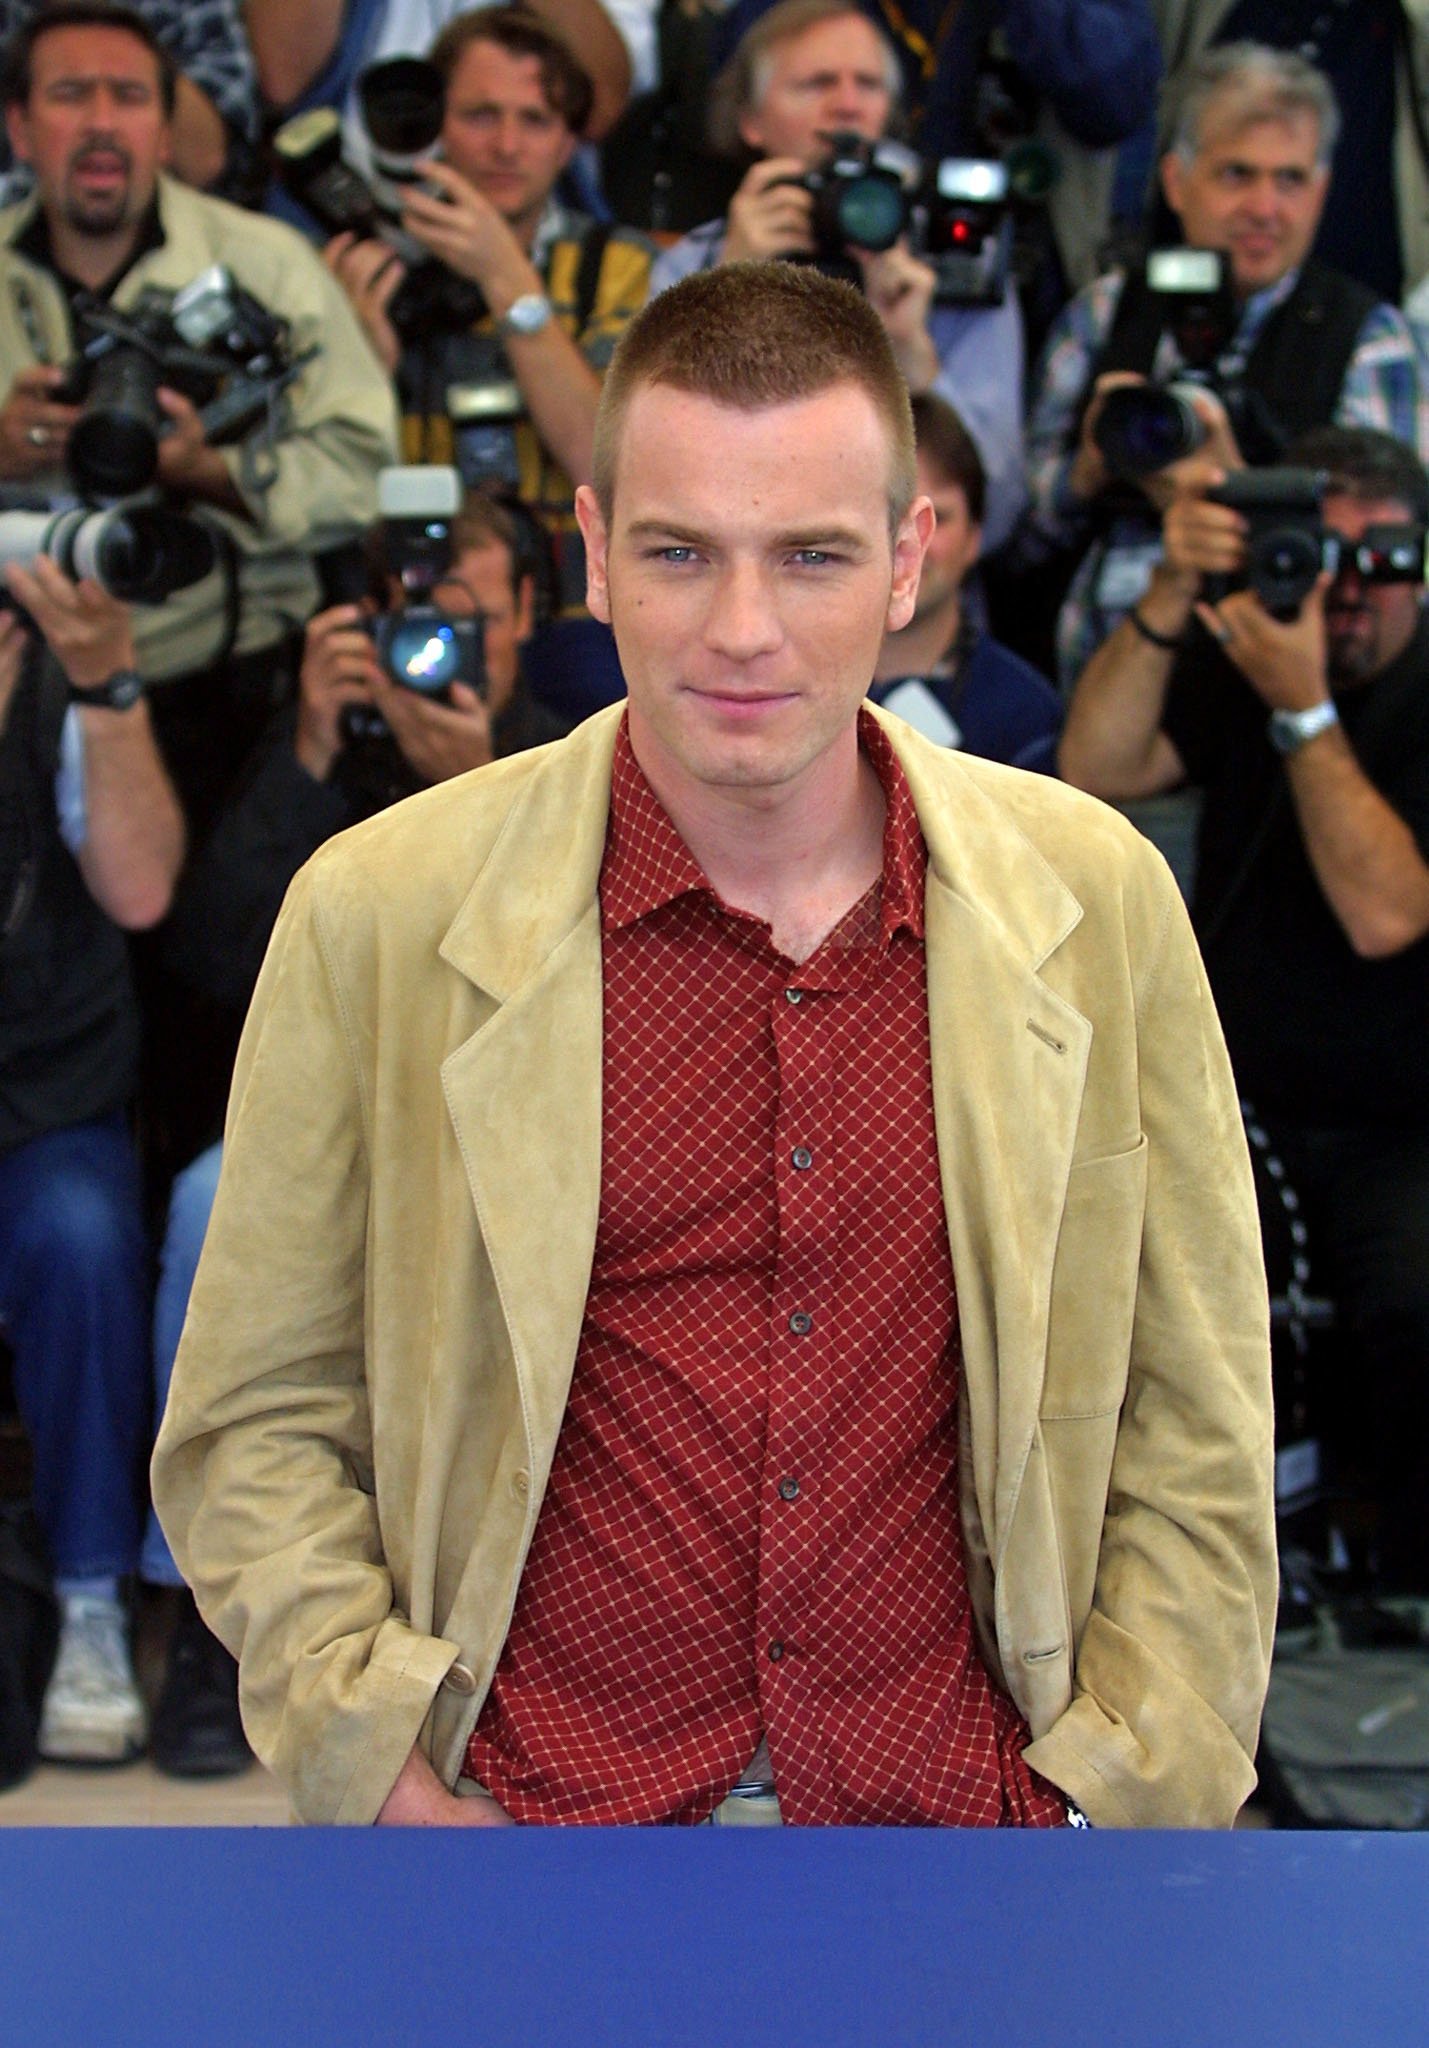 2001-05-07-54th-Cannes-Film-Festival-Moulin-Rouge-Photocall-055.jpg